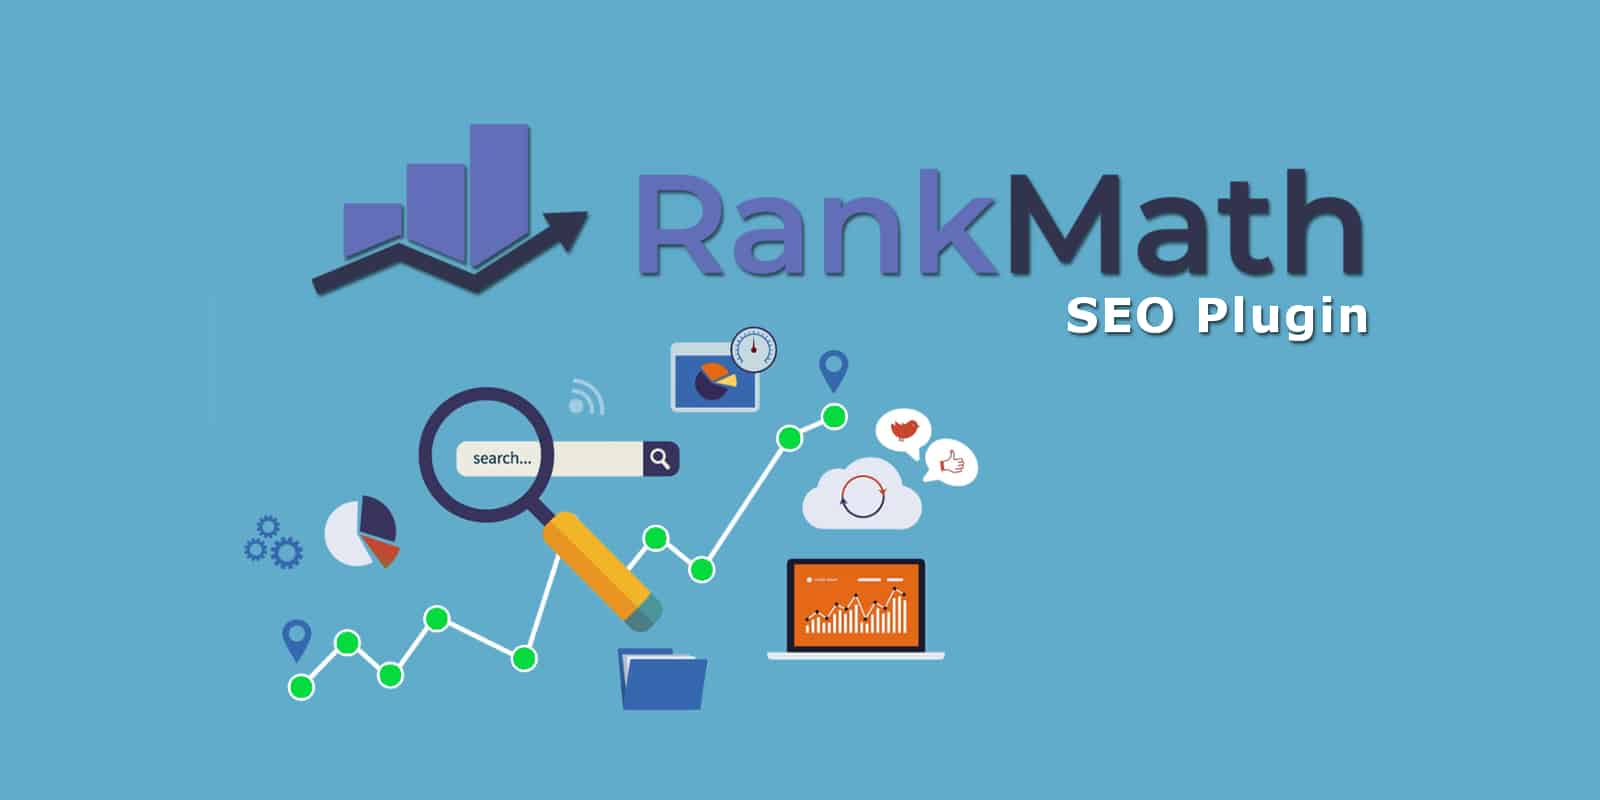 All You Need To Know About Rank Math For SEO